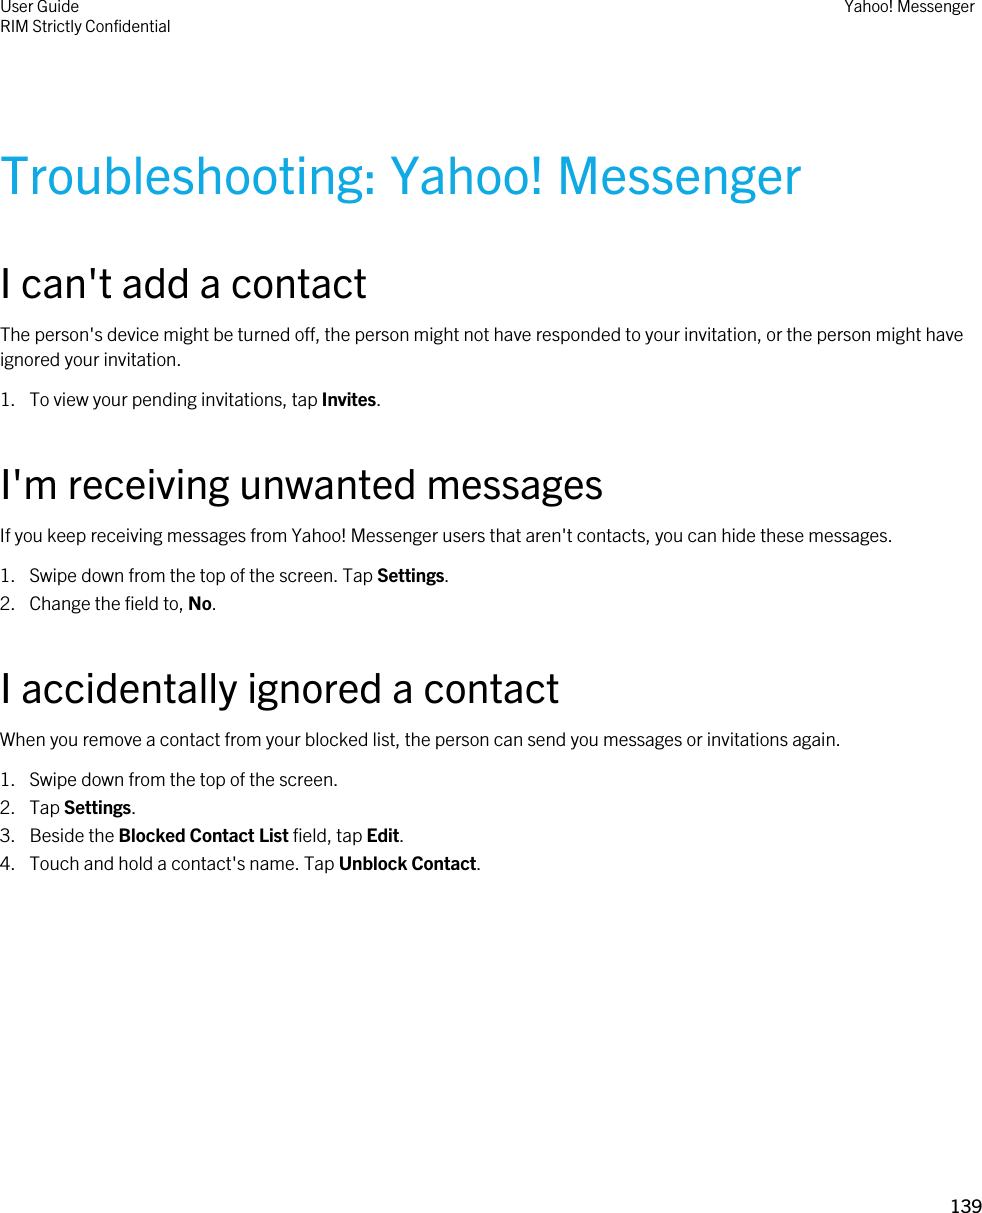 Troubleshooting: Yahoo! MessengerI can&apos;t add a contactThe person&apos;s device might be turned off, the person might not have responded to your invitation, or the person might have ignored your invitation.1. To view your pending invitations, tap Invites.I&apos;m receiving unwanted messagesIf you keep receiving messages from Yahoo! Messenger users that aren&apos;t contacts, you can hide these messages.1. Swipe down from the top of the screen. Tap Settings.2. Change the field to, No.I accidentally ignored a contactWhen you remove a contact from your blocked list, the person can send you messages or invitations again.1. Swipe down from the top of the screen.2. Tap Settings.3. Beside the Blocked Contact List field, tap Edit.4. Touch and hold a contact&apos;s name. Tap Unblock Contact.User GuideRIM Strictly ConfidentialYahoo! Messenger139 